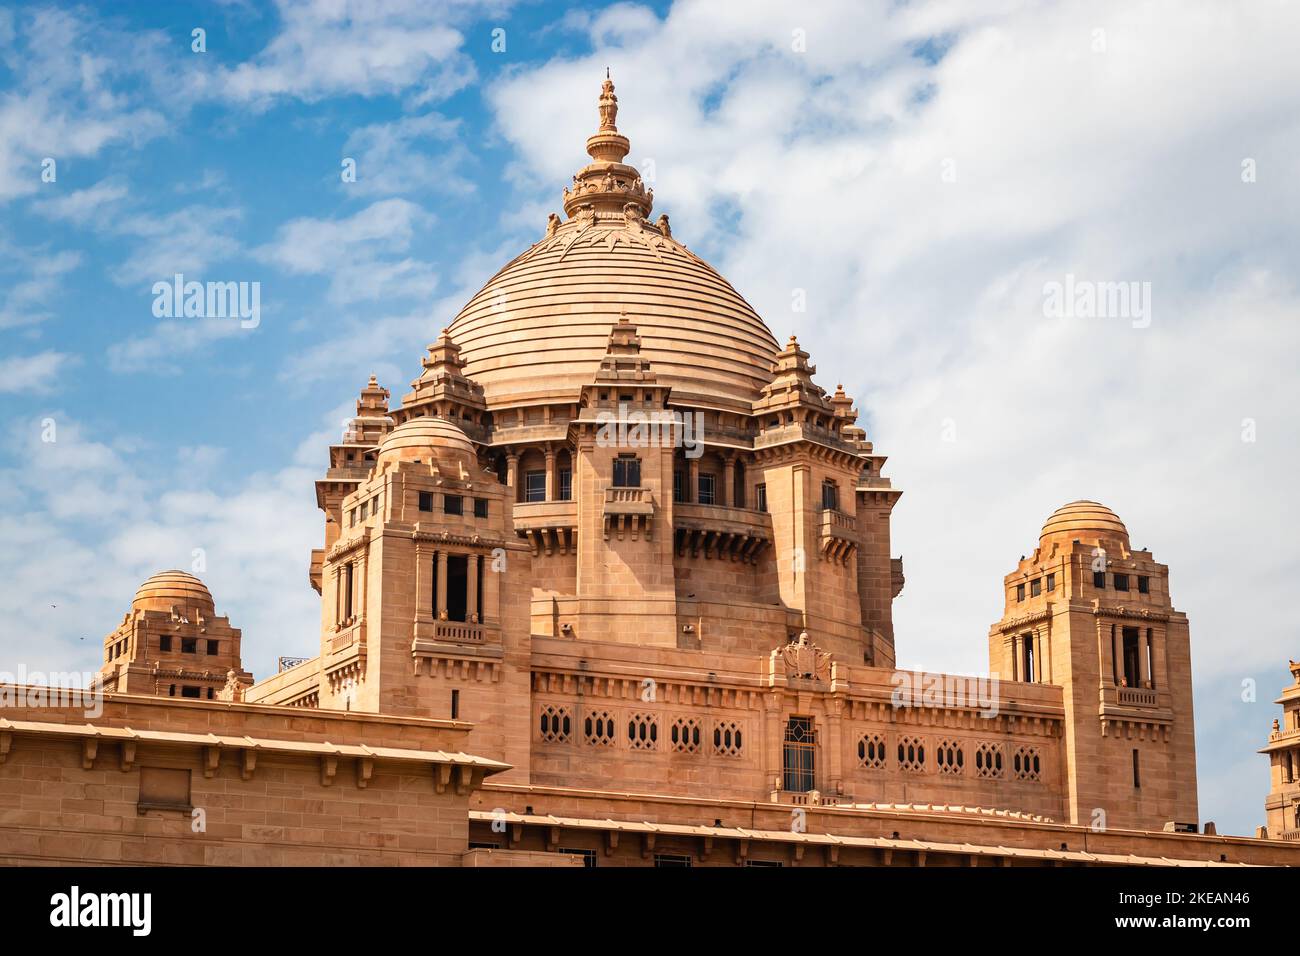 vintage king place dome with bright blue sky from flat angle image is taken at umaid bhawan palace jodhpur rajasthan india on Sep 06 2022. Stock Photo